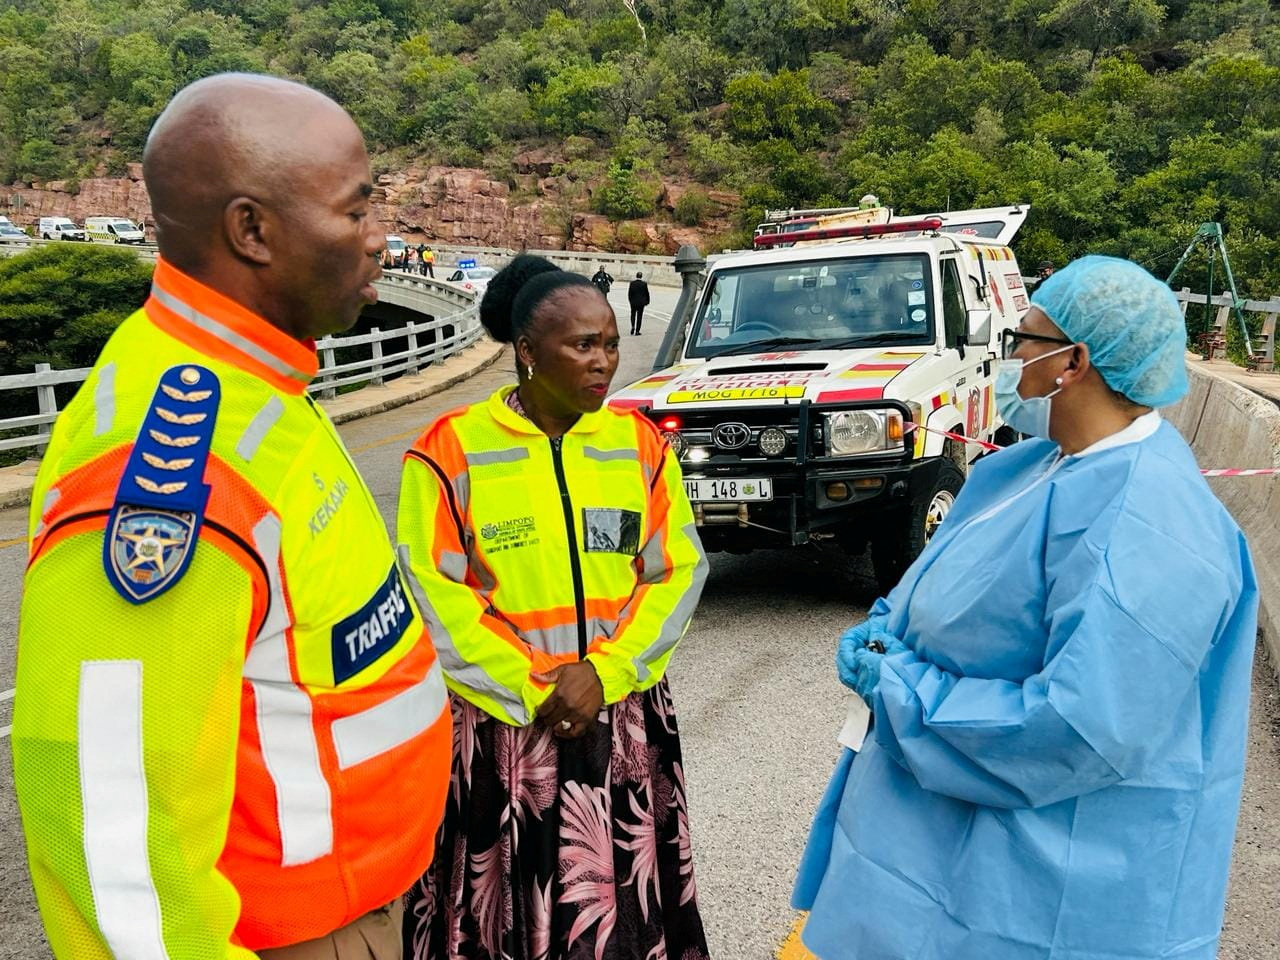 Emergency teams on the bridge where the bus crashed. Two are wearing high-viz uniforms. One is wearing pale blue medical overalls, a hat and gloves. There is a truck behind them.